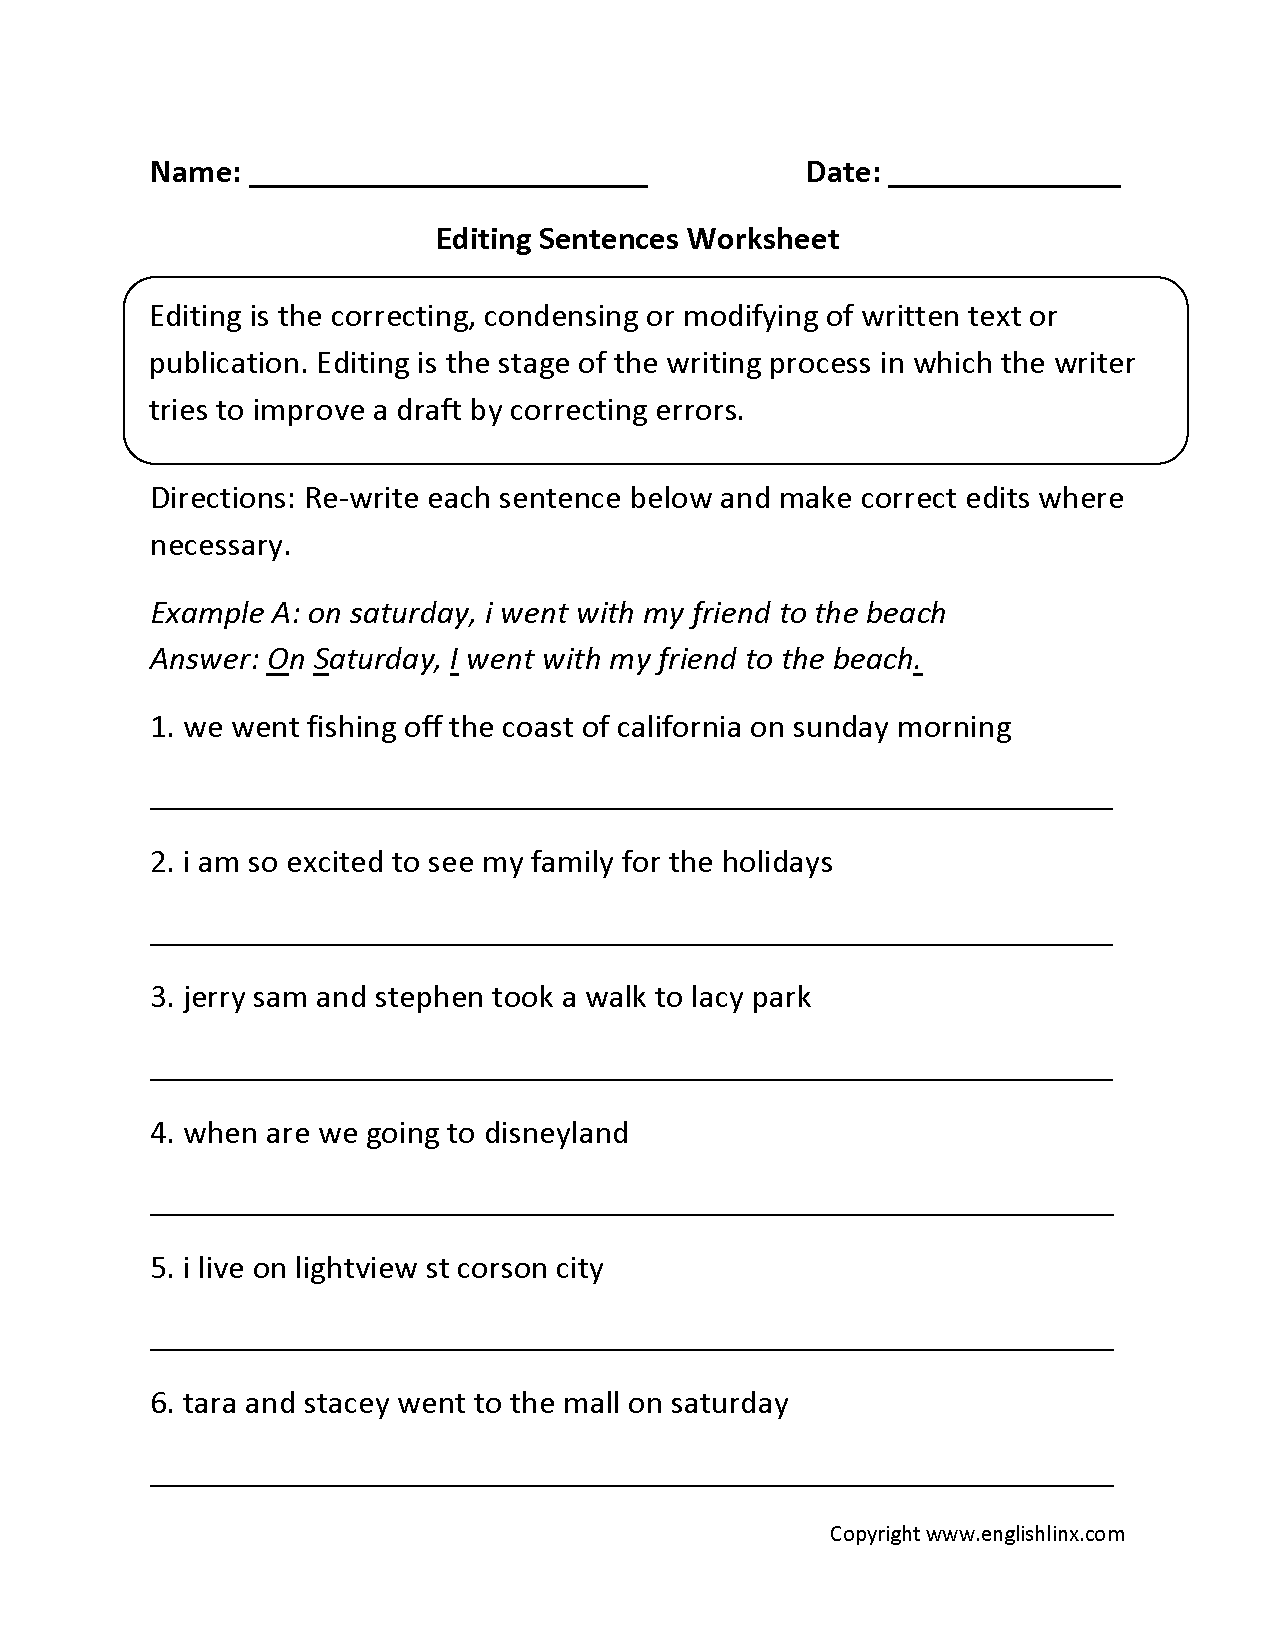 paragraph-editing-worksheets-for-4th-grade-writing-worksheets-editing